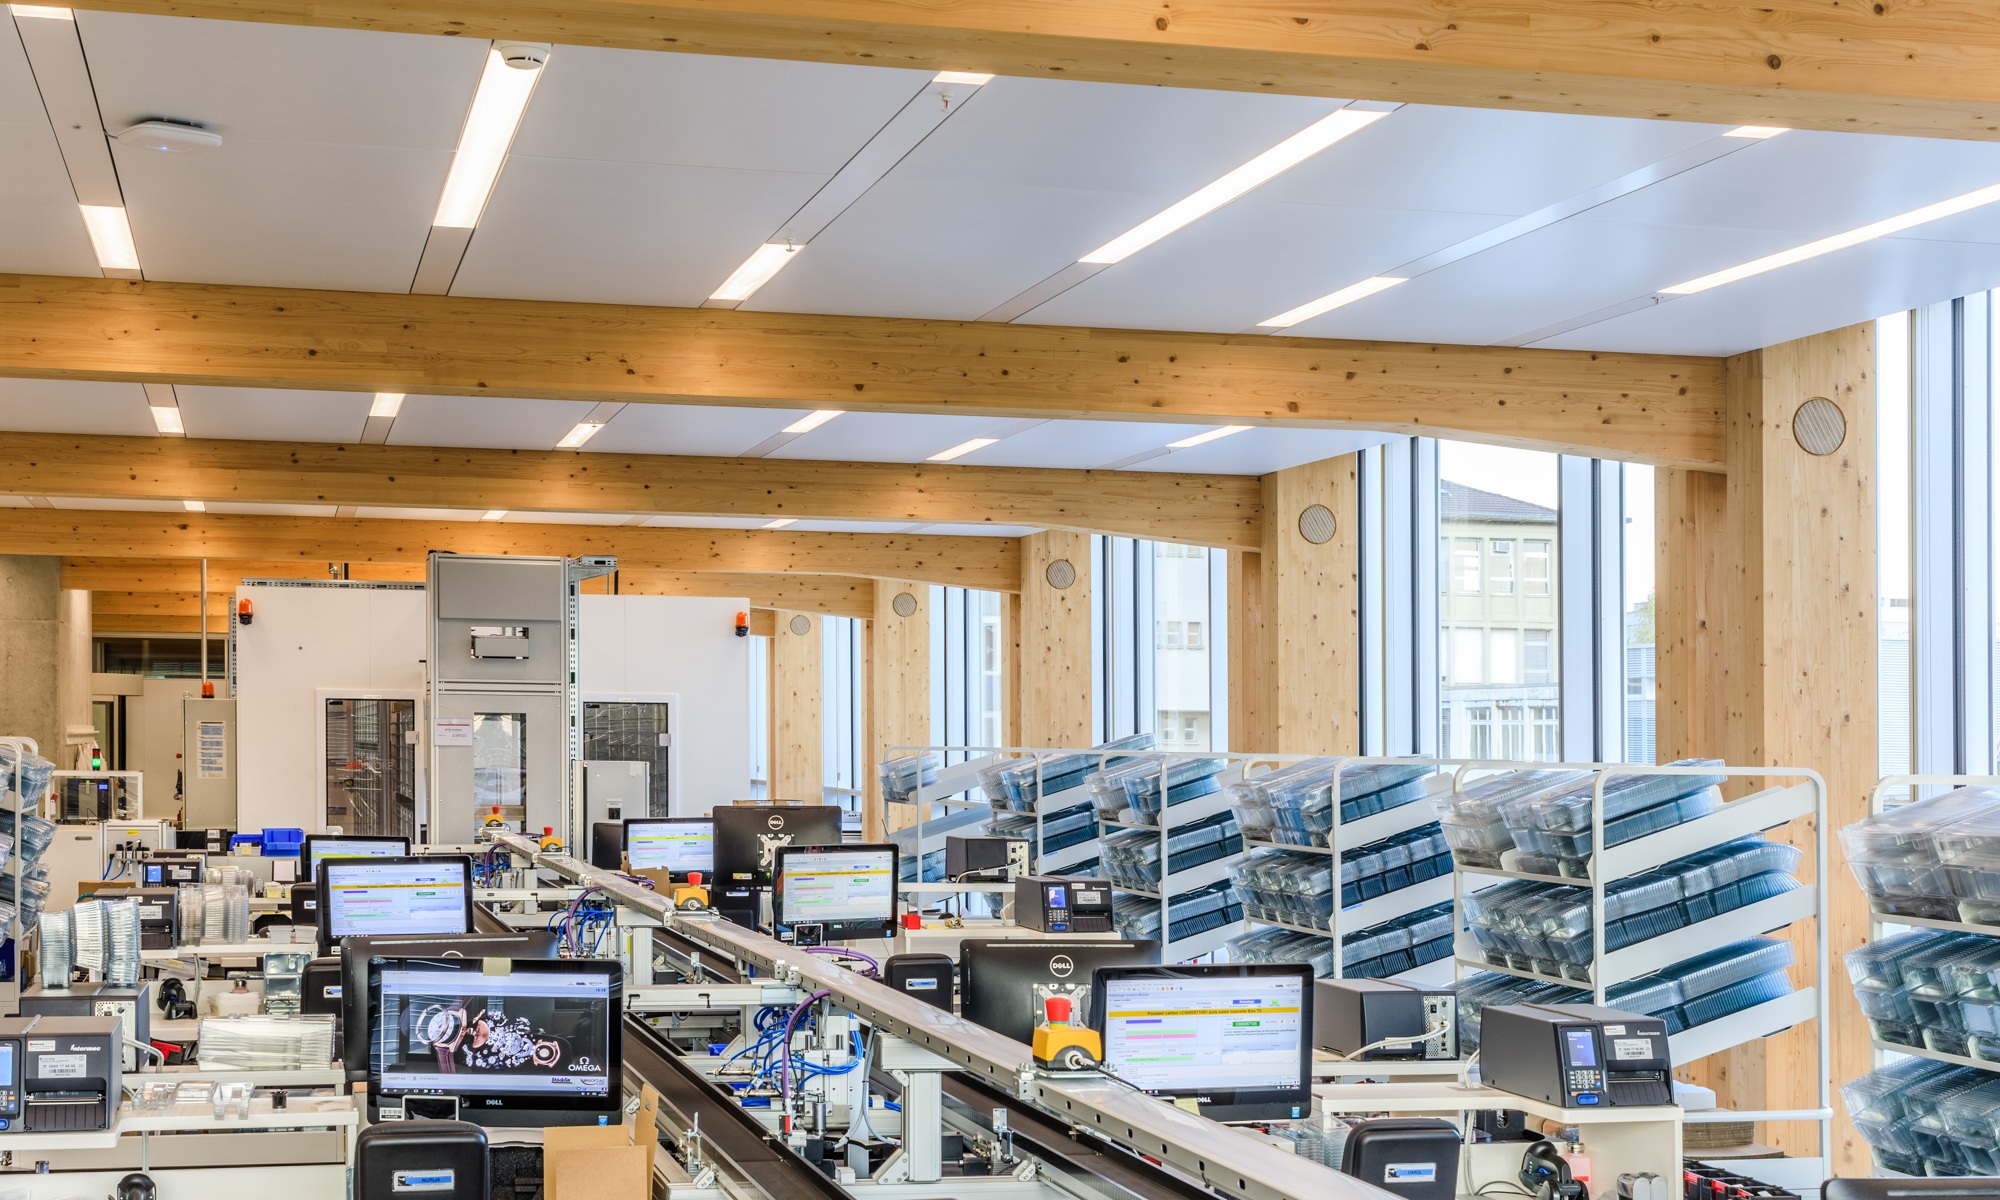 Photograph of the Omega production workshop with timber roof structure and bright, open spaces